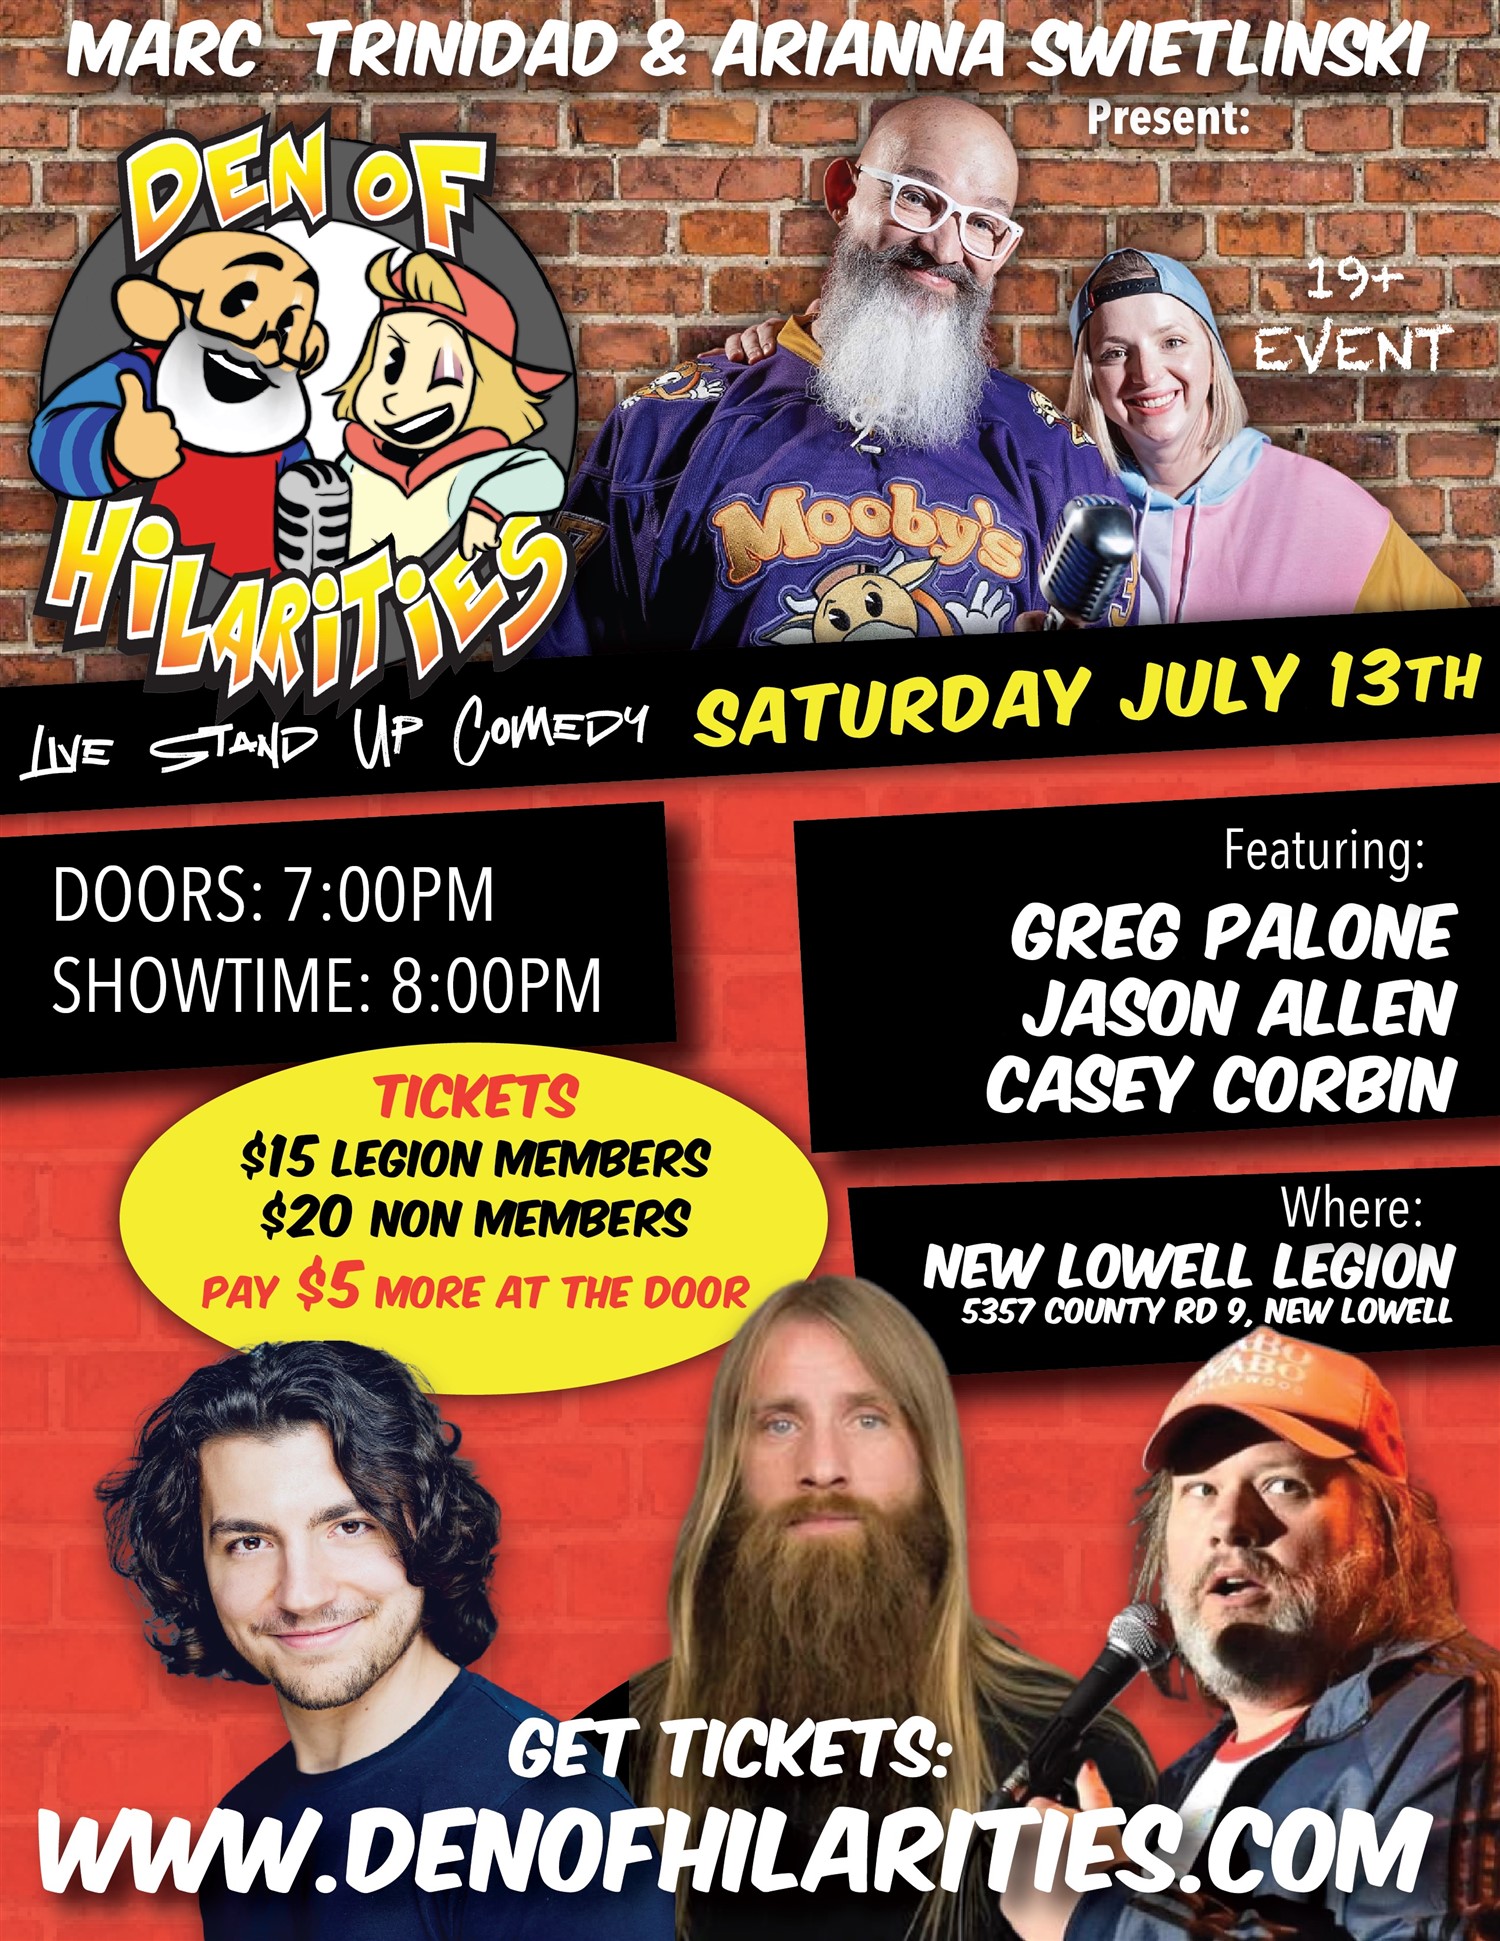 Den of Hilarities New Lowell Legion on Jul 13, 20:00@New Lowell Legion - Buy tickets and Get information on Marc Trinidad Ent 